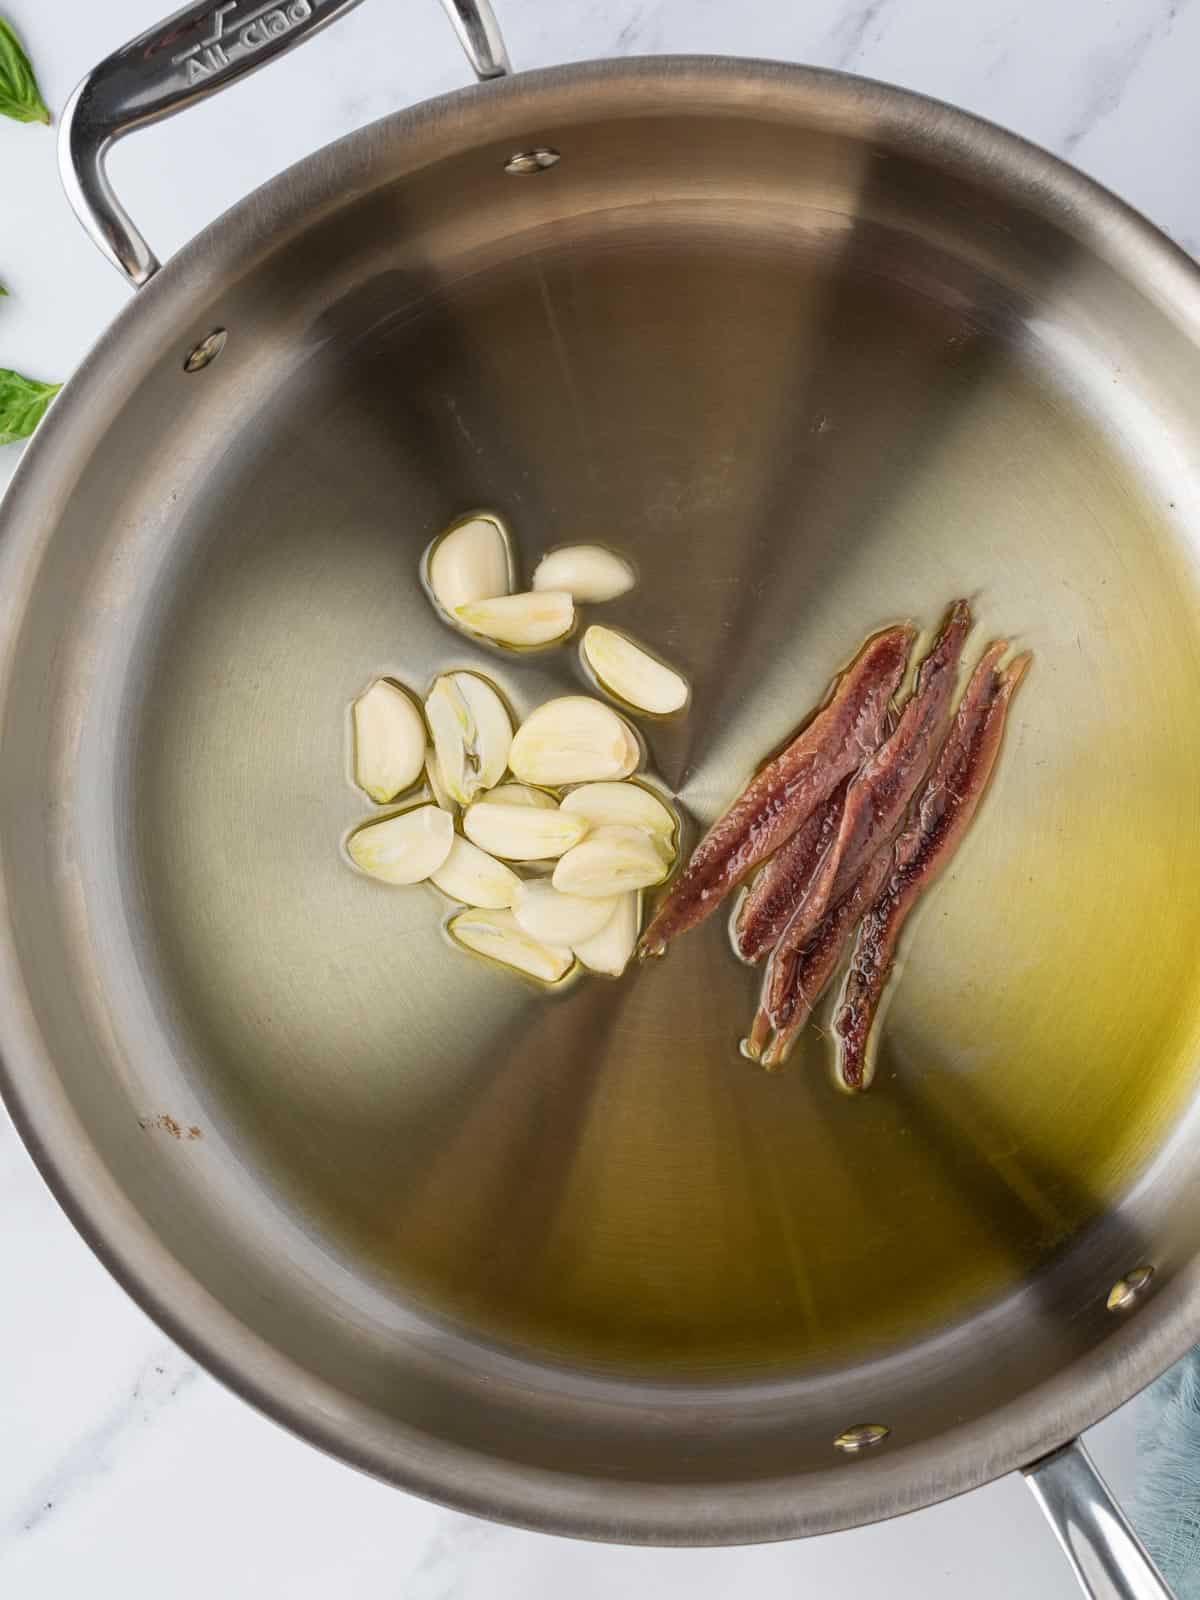 Garlic and anchovies added to oil in a pan.